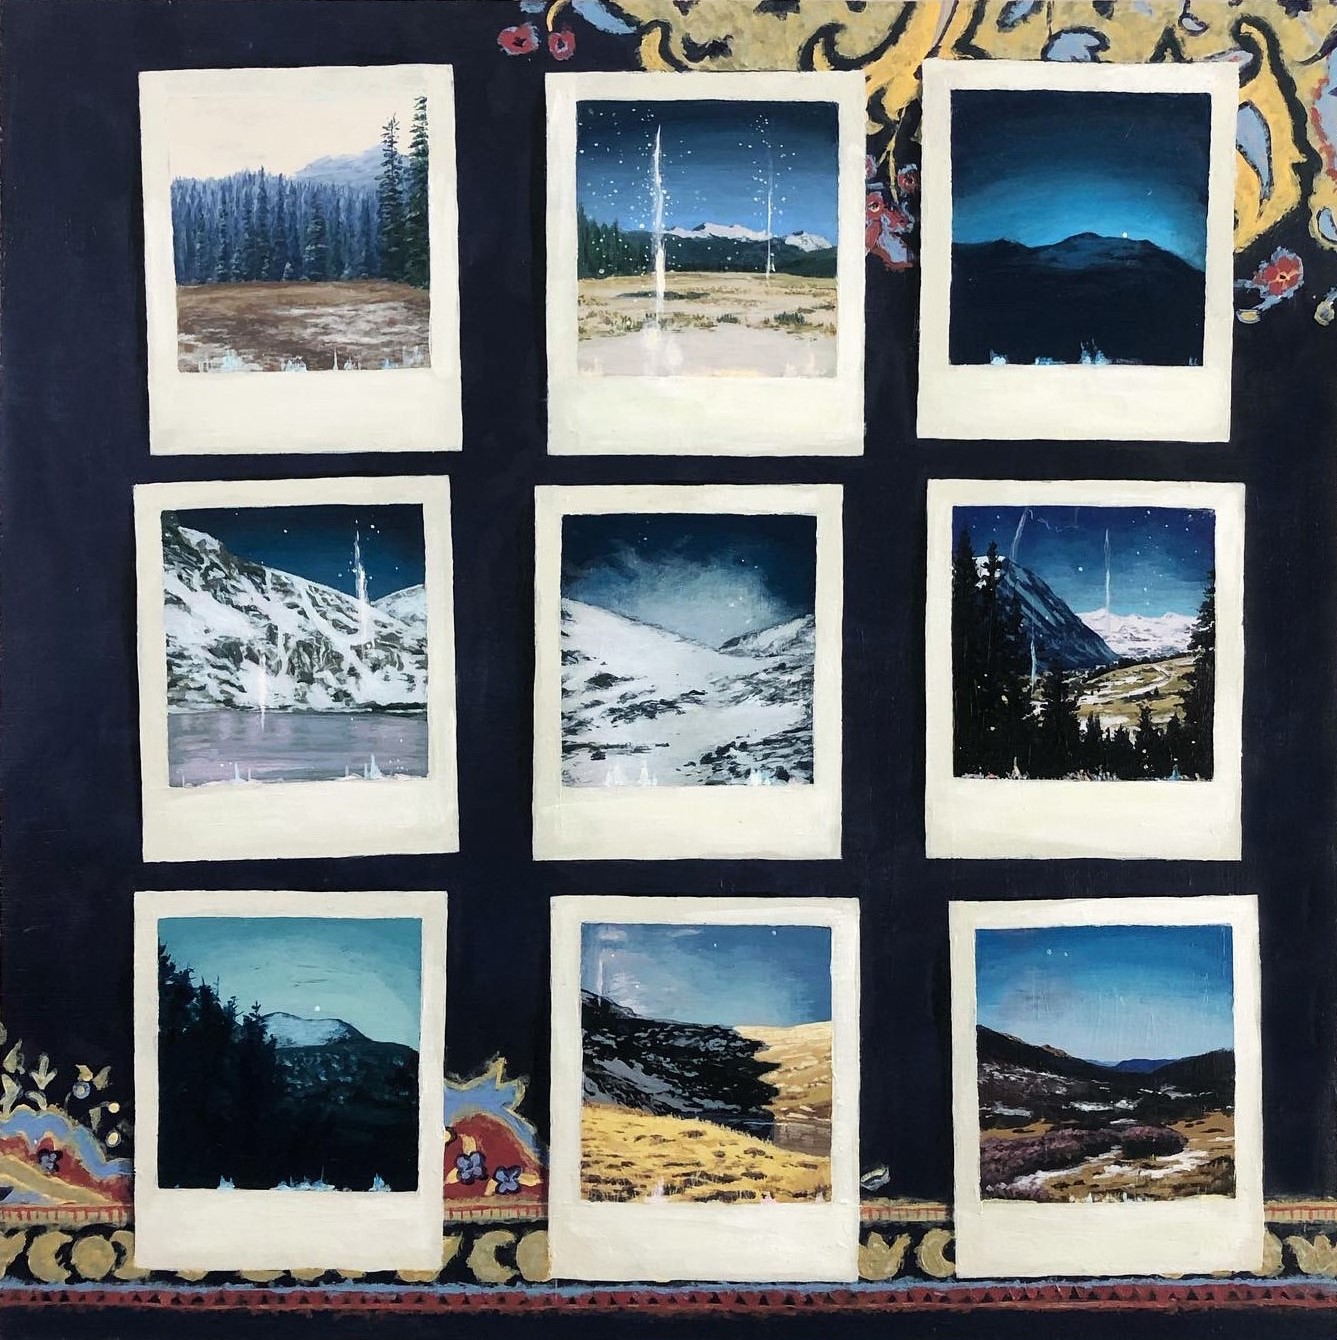 Acrylic painting of 9 polaroid pictures each depicting landscapes.